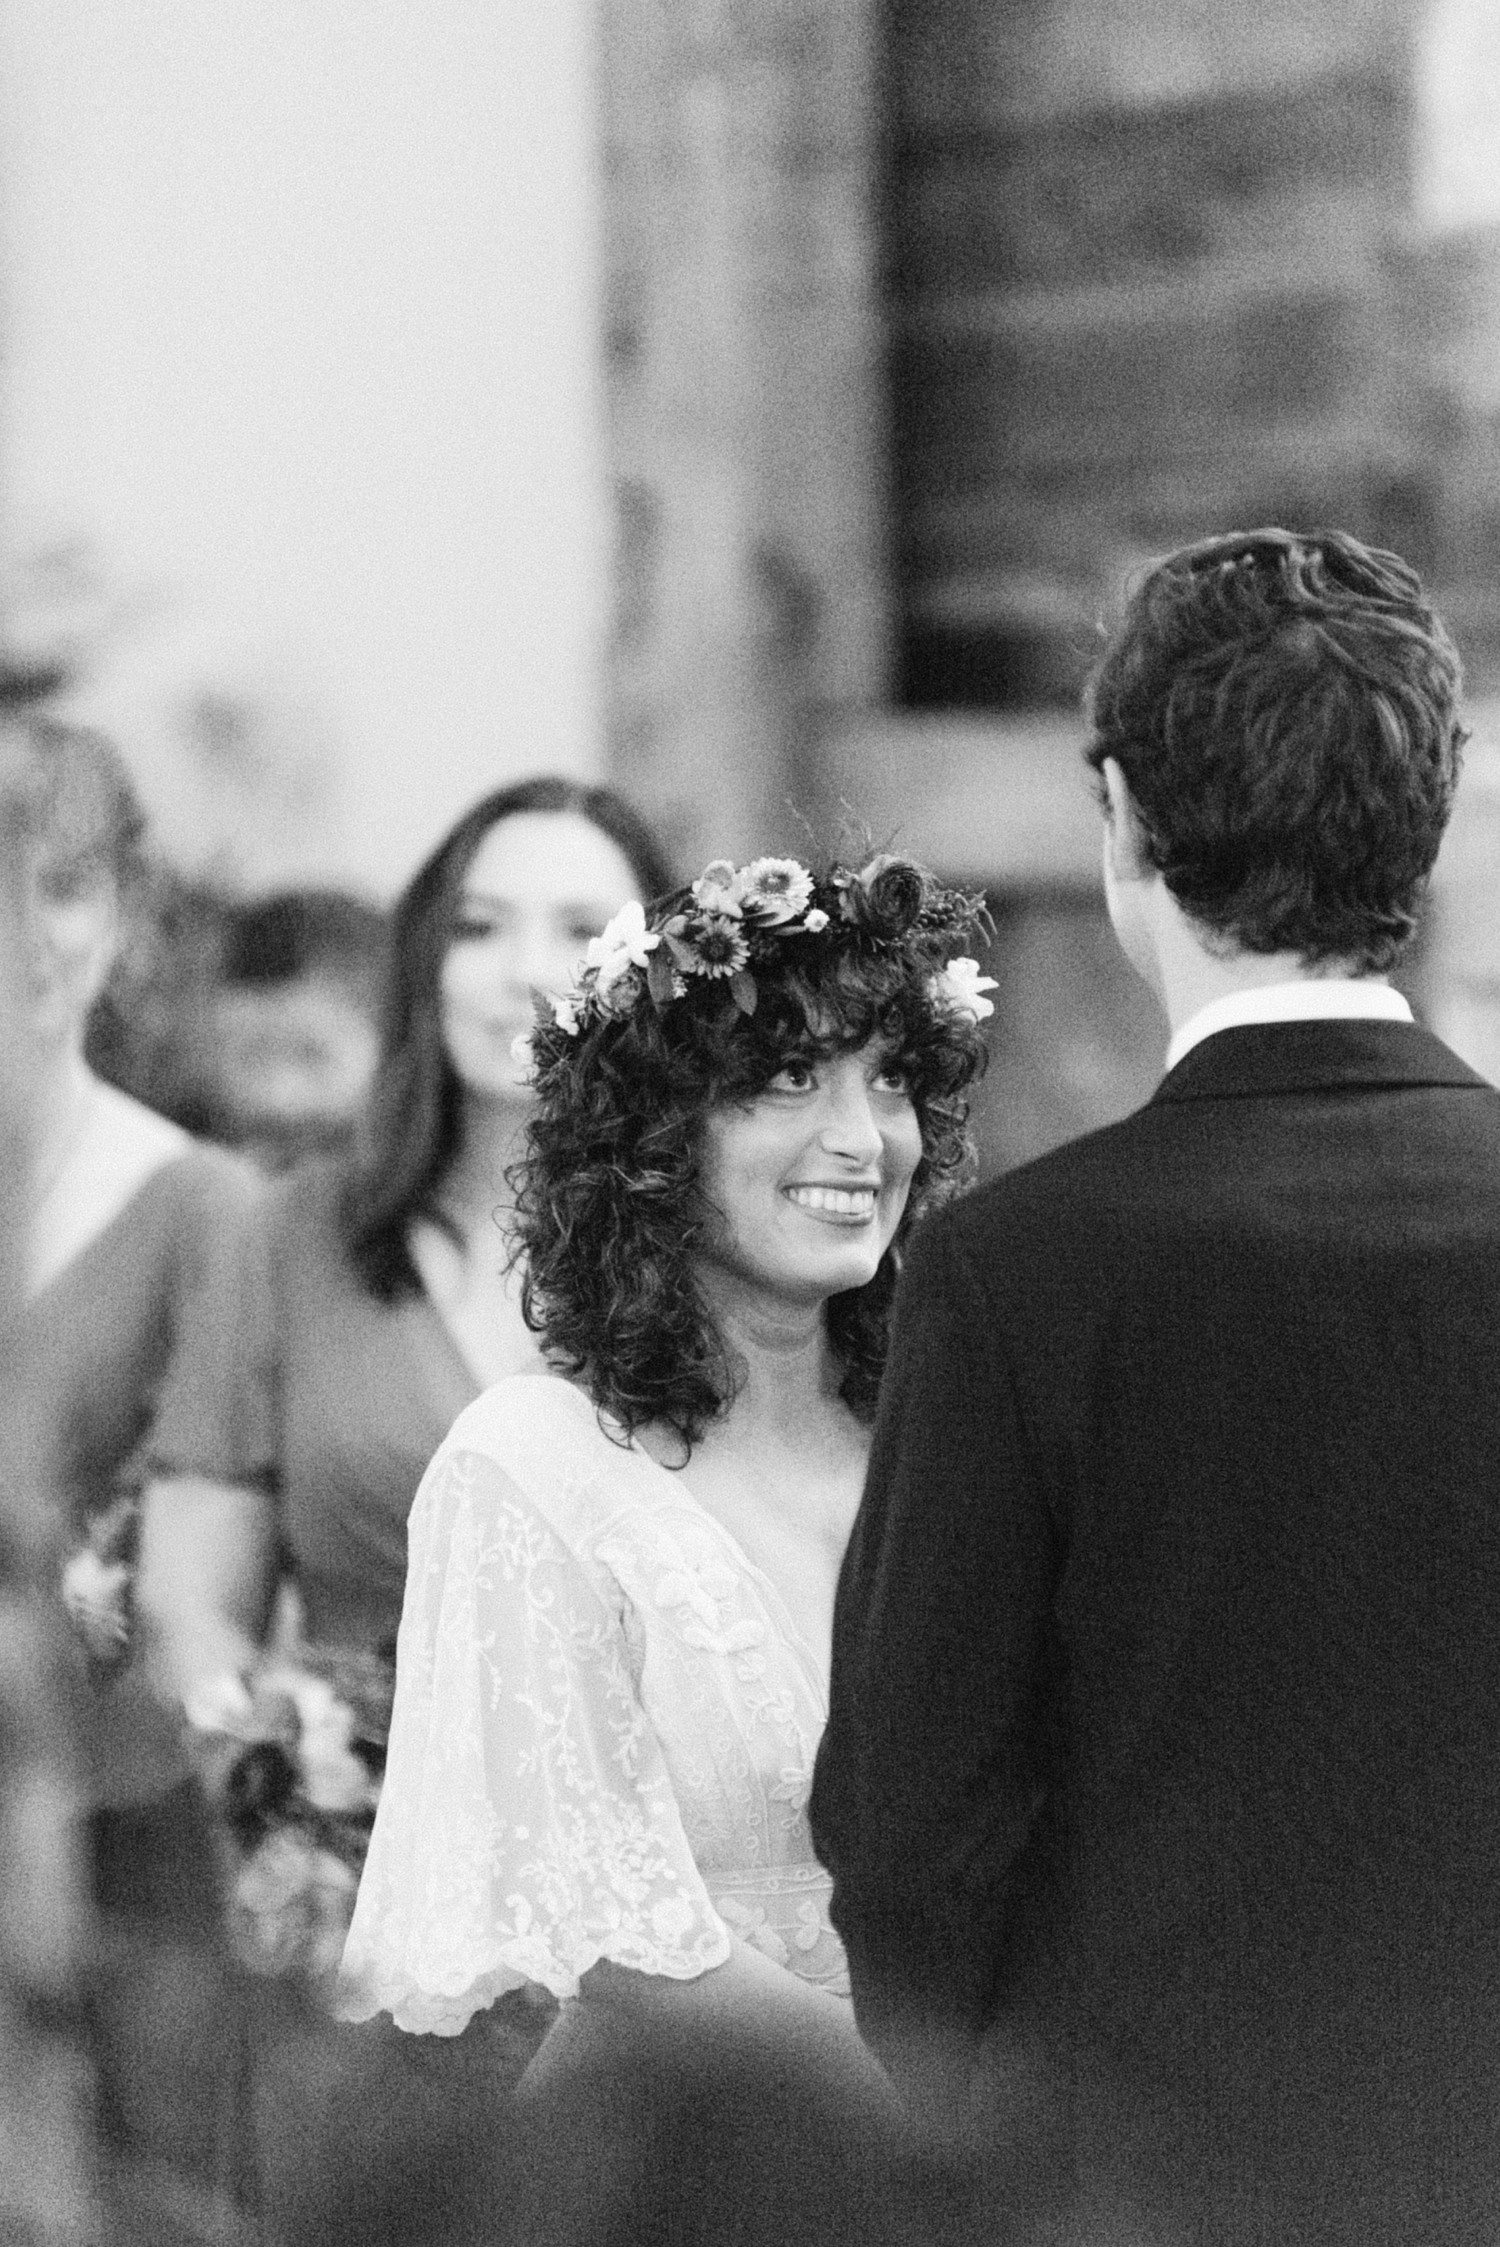 Bride smiling at groom during ceremony